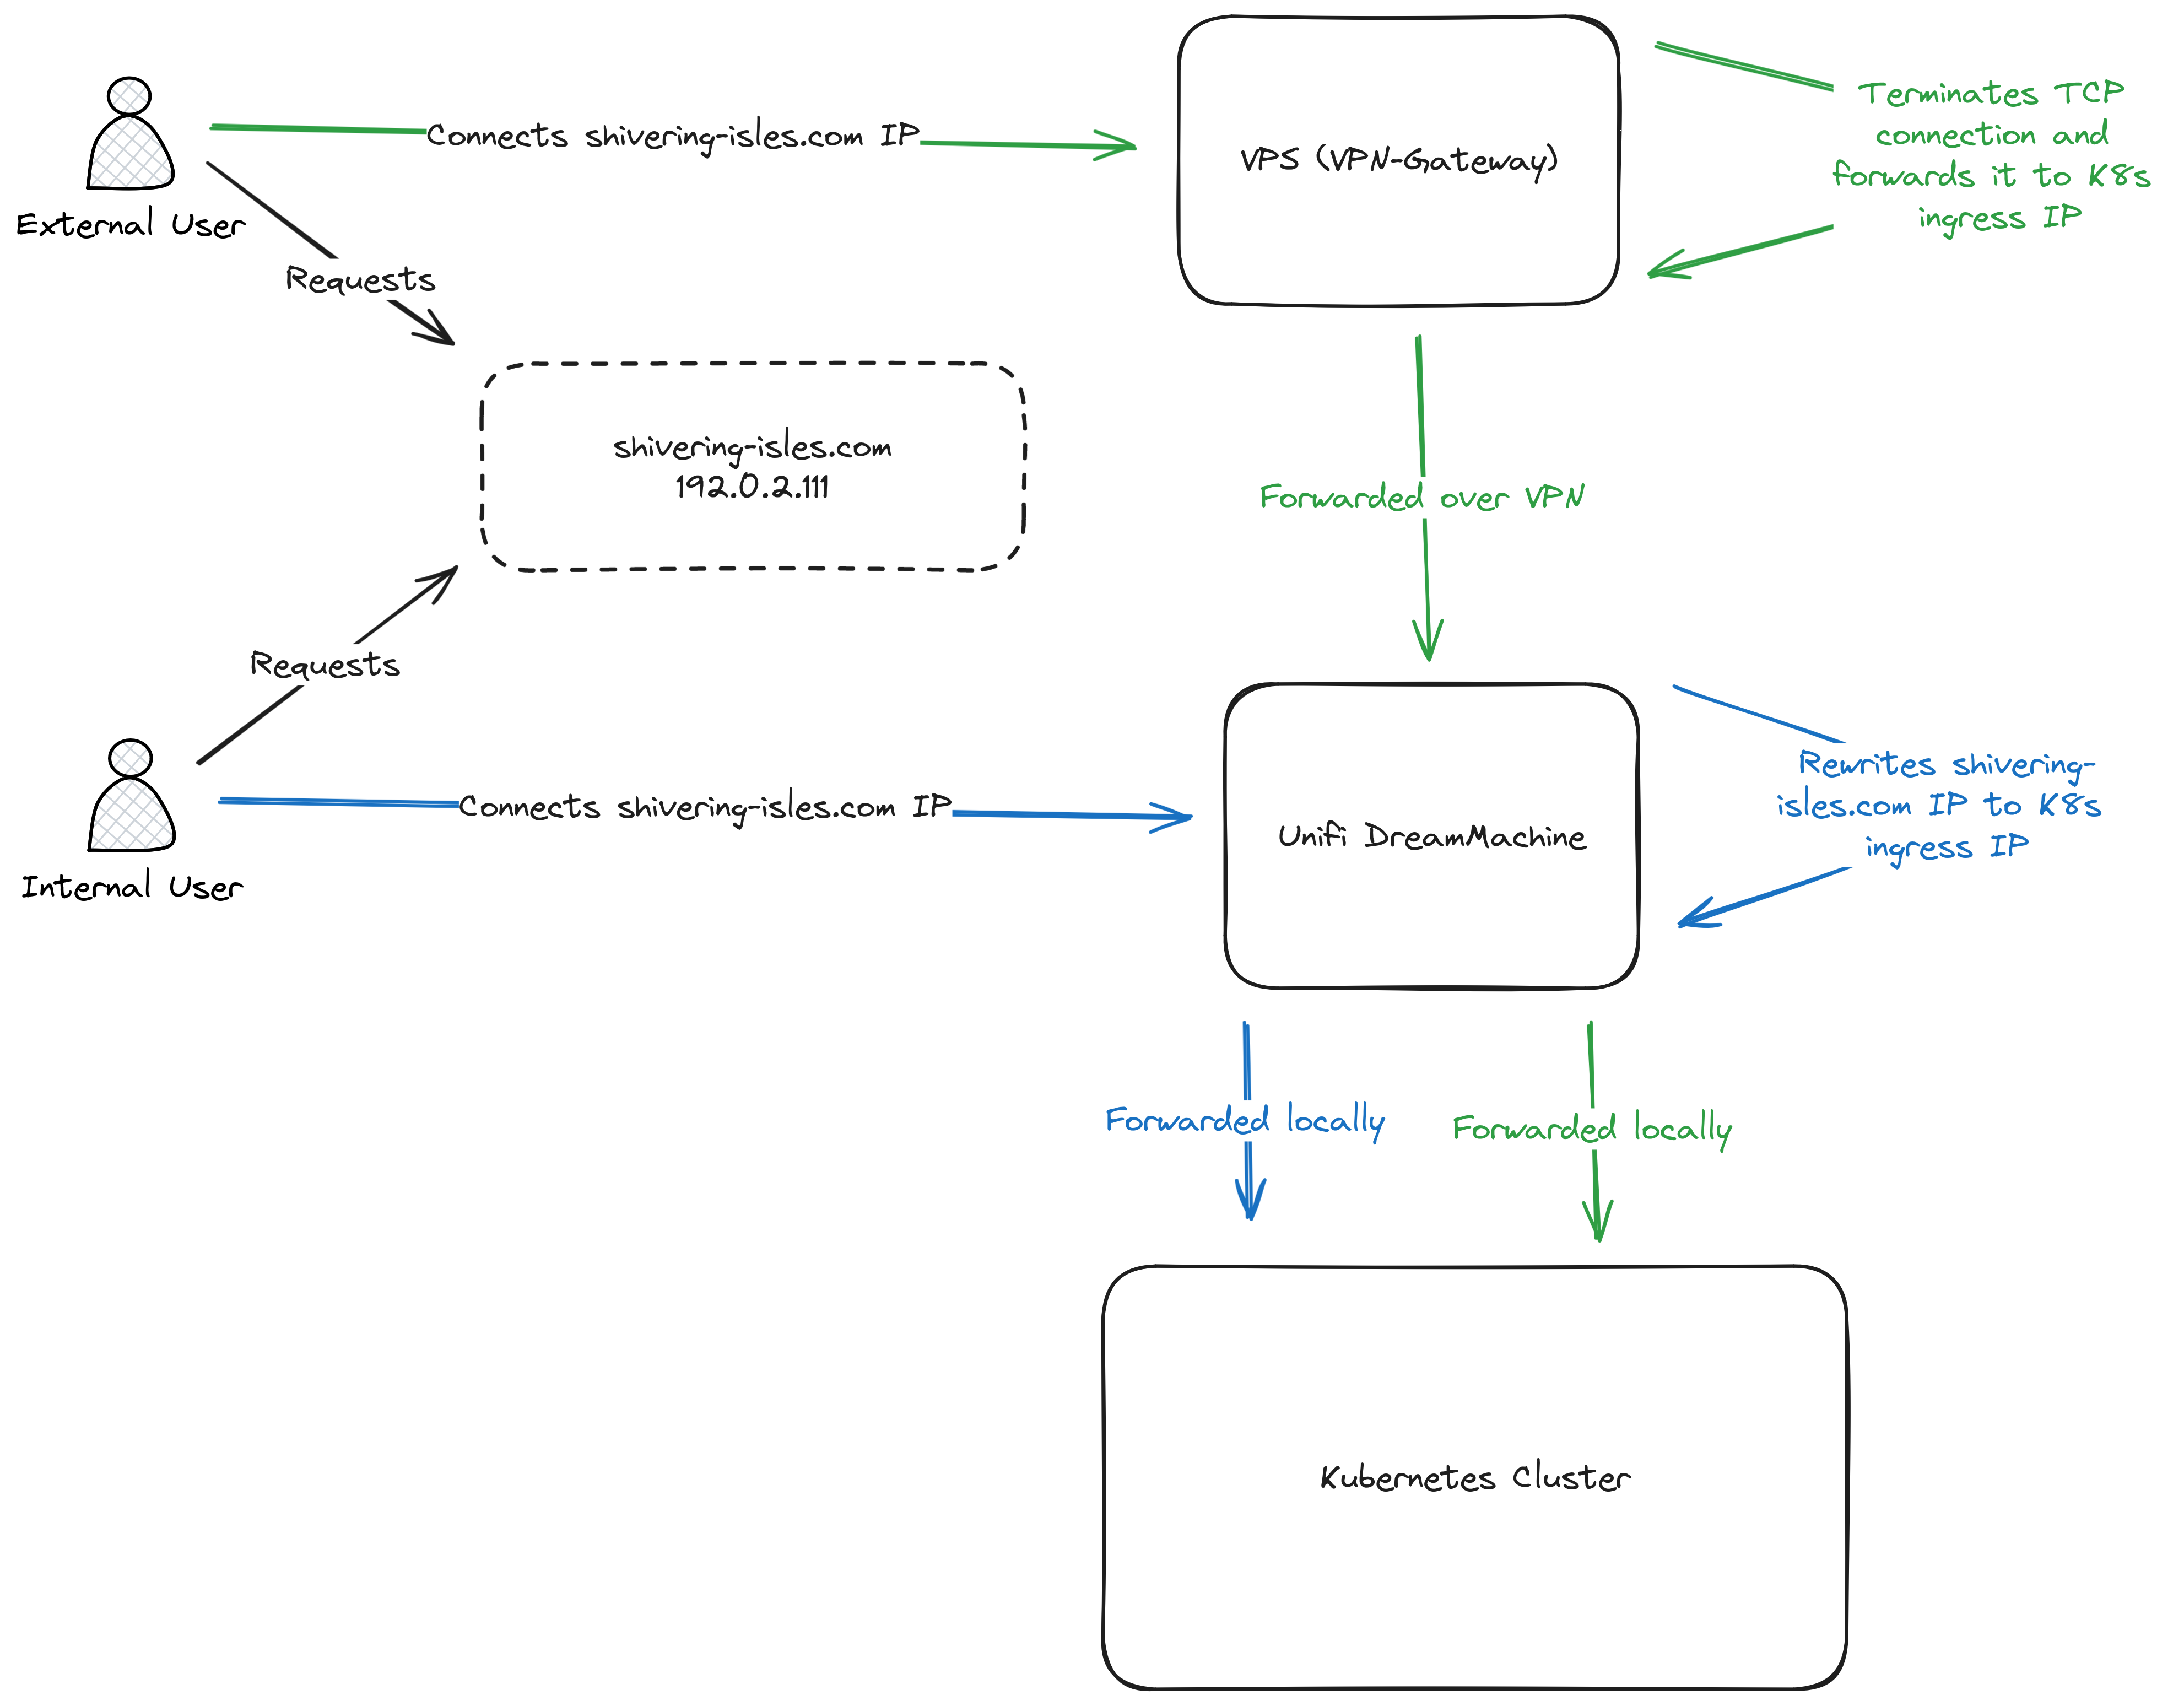 Image of the traffic flow for external and internal users. For internal users, the traffic is redirected directly on the unifi dream machine to the Kubernetes cluster. For external users, they reach the VPS before the traffic is forwarded over VPN to the Unifi Dream Machine and then the traffic is forwarded to the Kubernetes cluster.